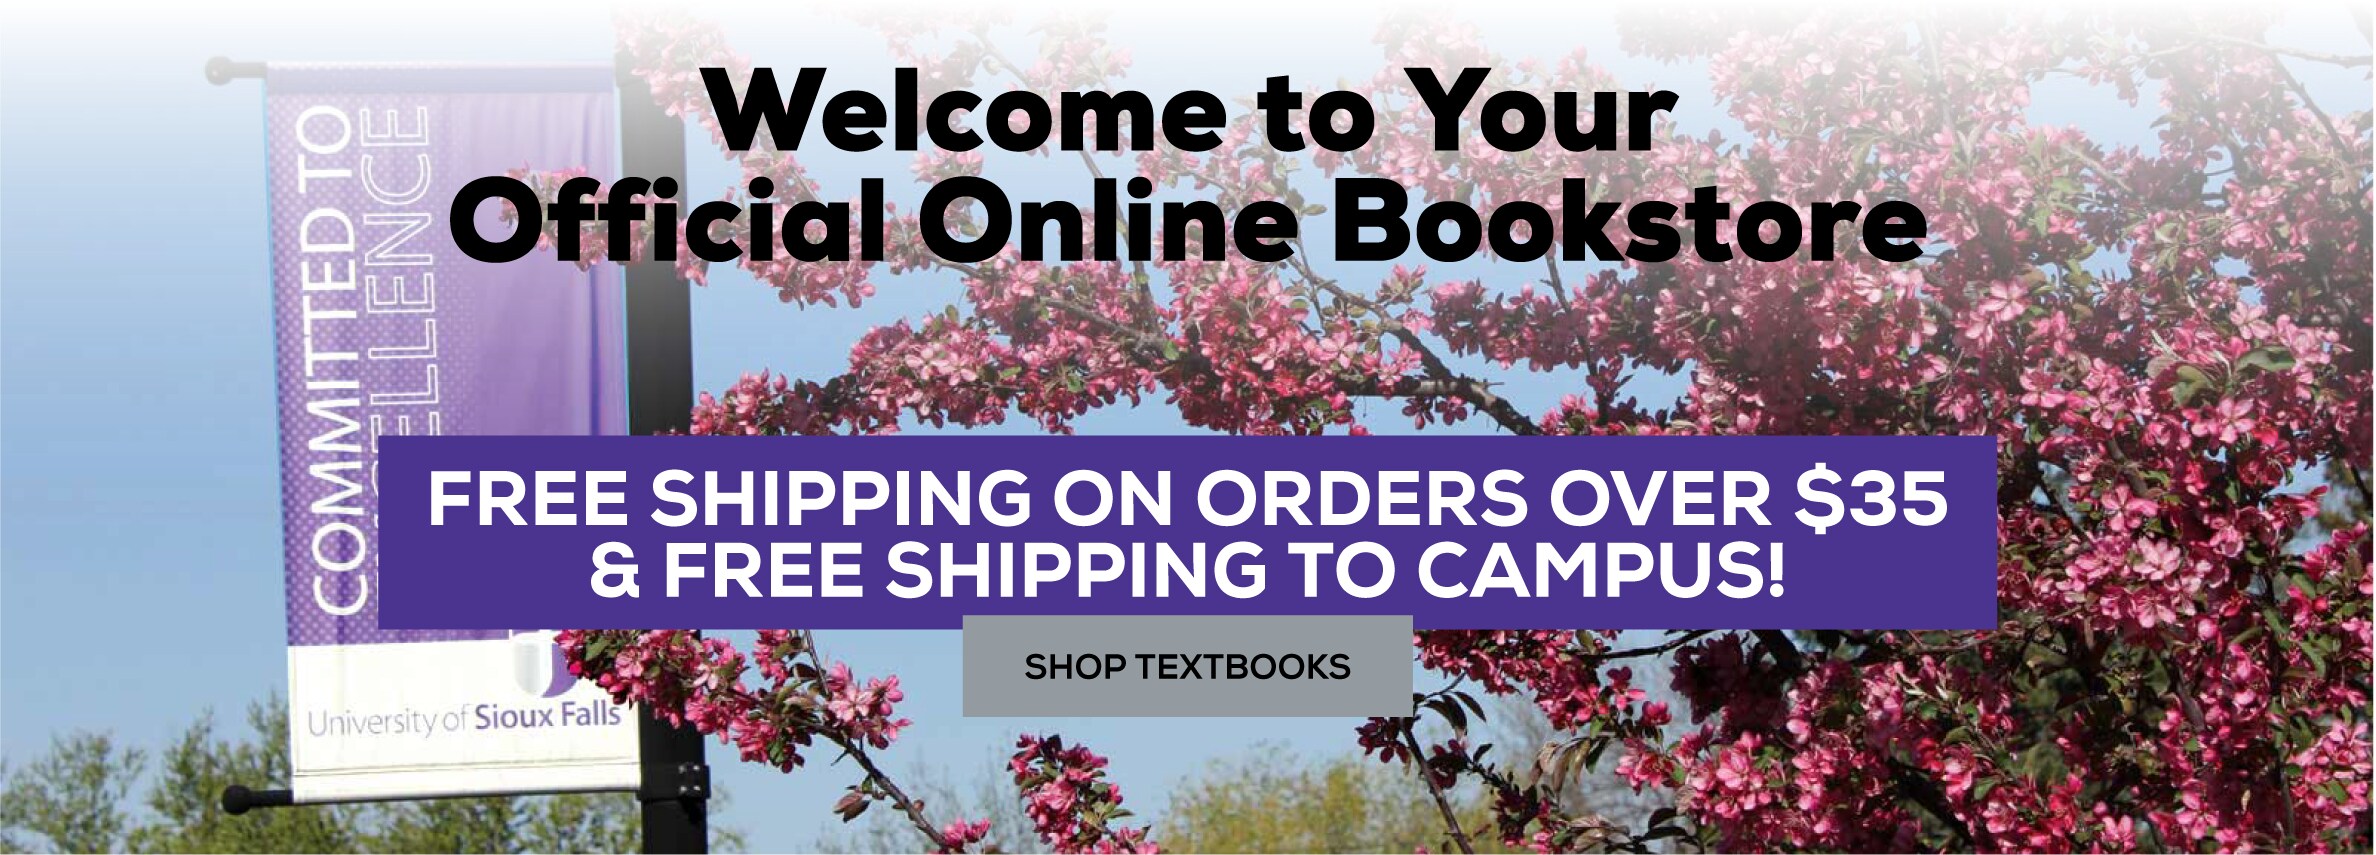 Welcome to your official online bookstore. Free shipping on orders over $35 and free shipping to campus! Shop textbooks.